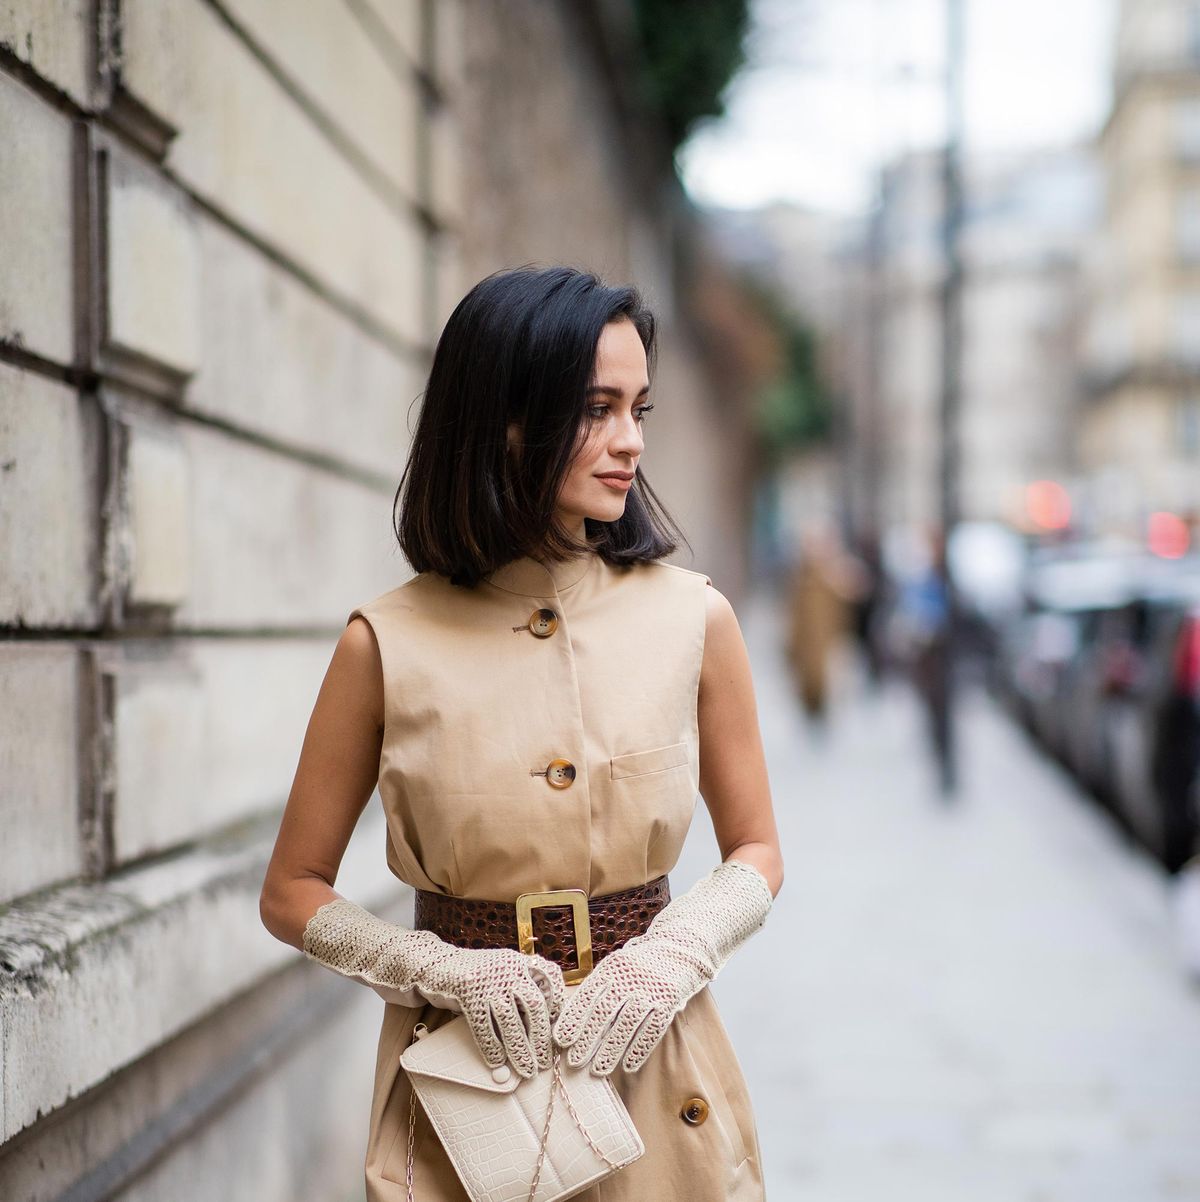 Be Stylish Beige & Brown Jumper - Want That Trend